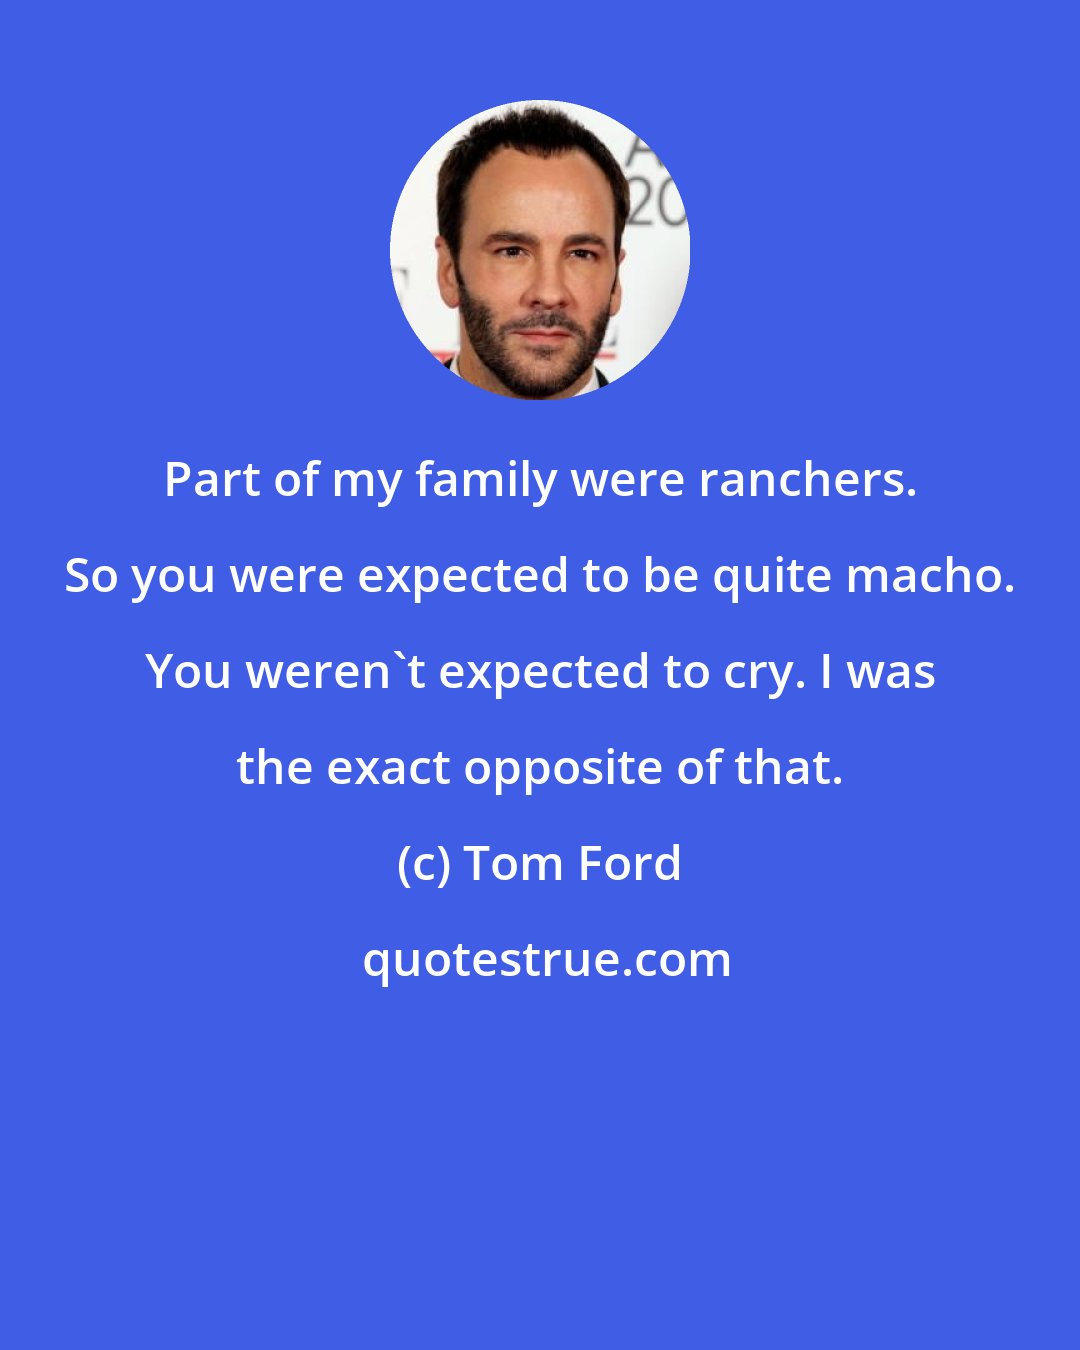 Tom Ford: Part of my family were ranchers. So you were expected to be quite macho. You weren't expected to cry. I was the exact opposite of that.